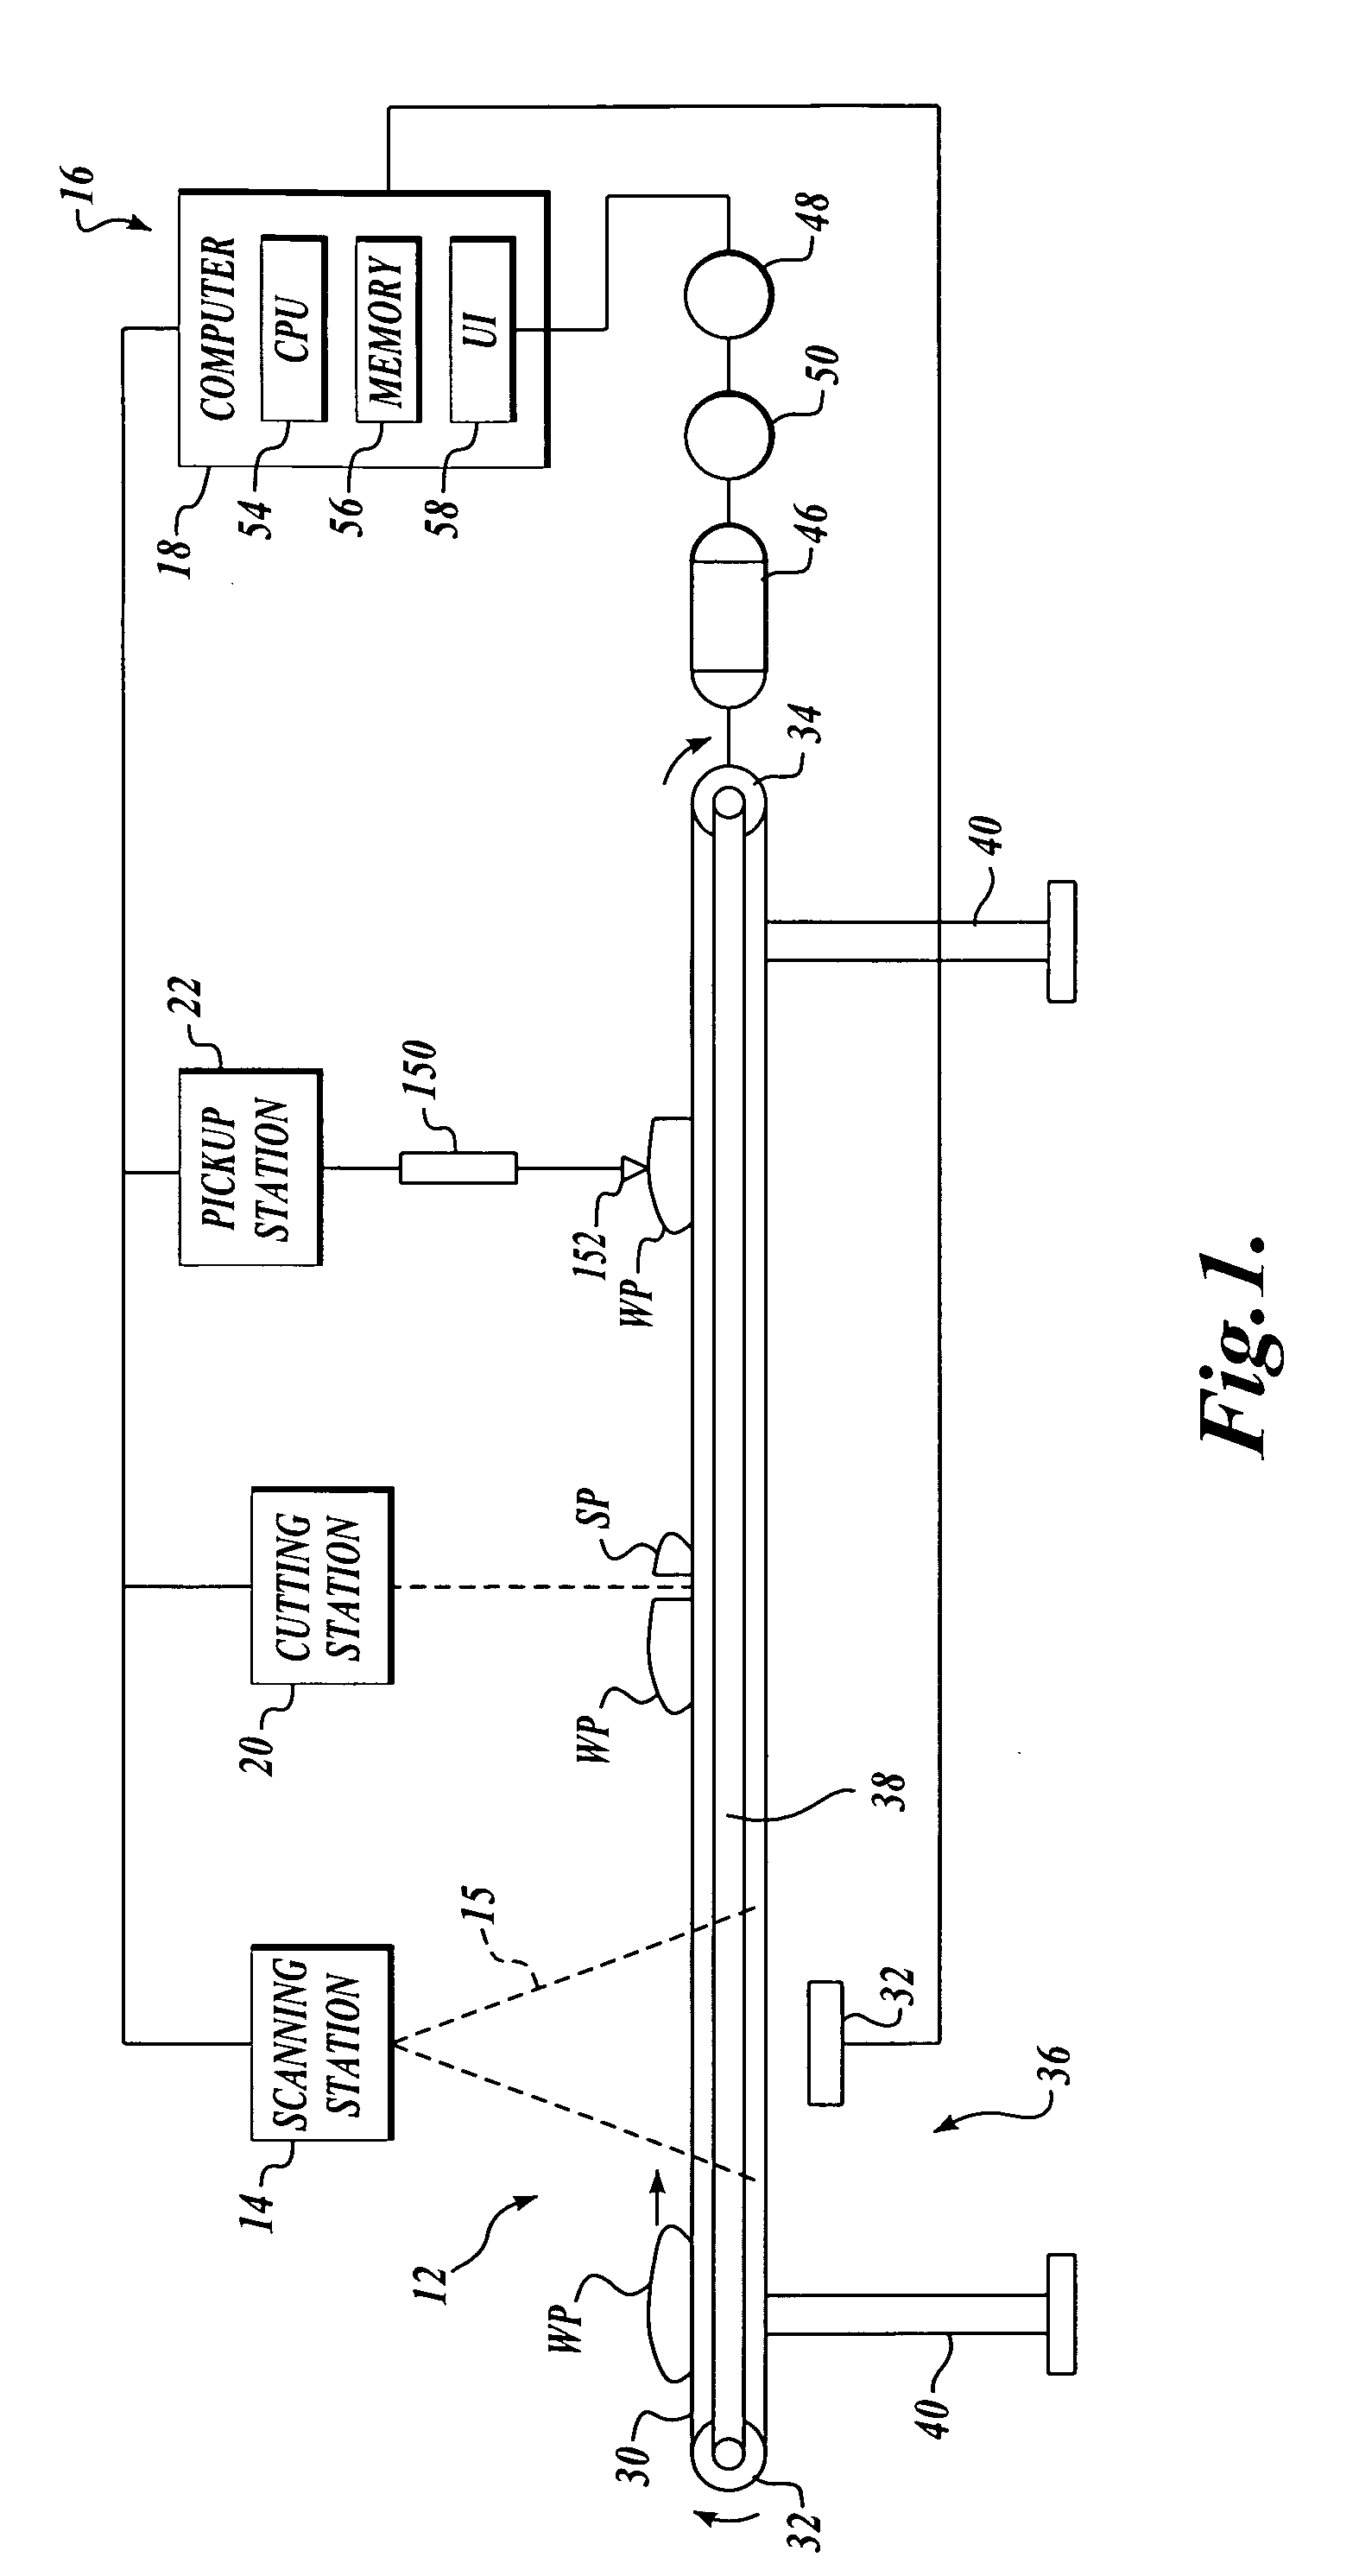 Apparatus and method for portioning using automatic workpiece conveyance speed control